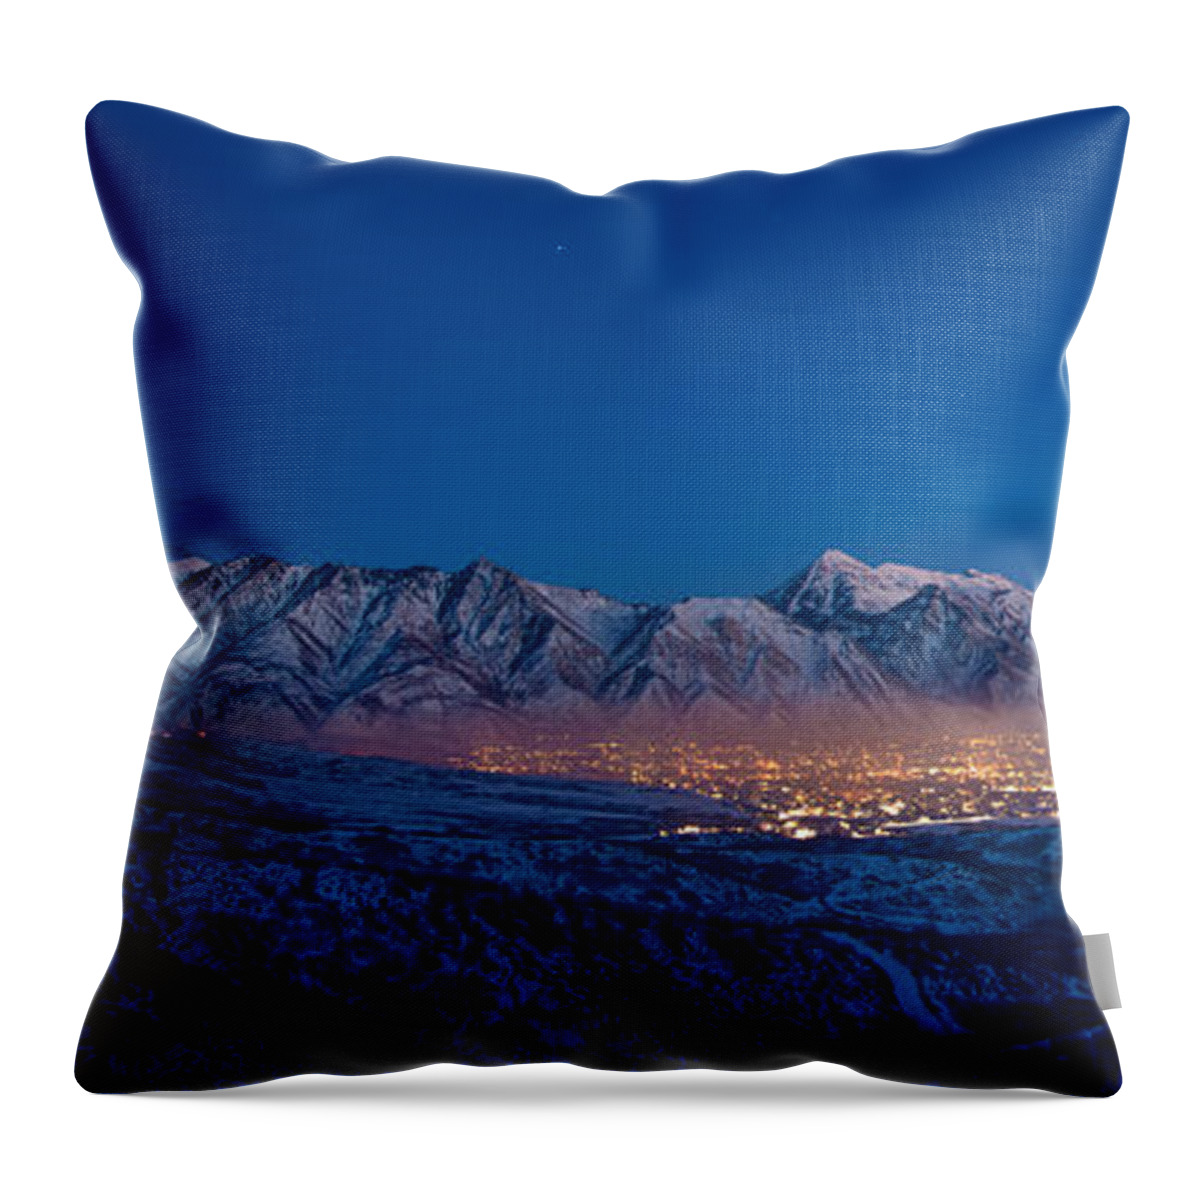 Utah Throw Pillow featuring the photograph Utah Valley by Chad Dutson